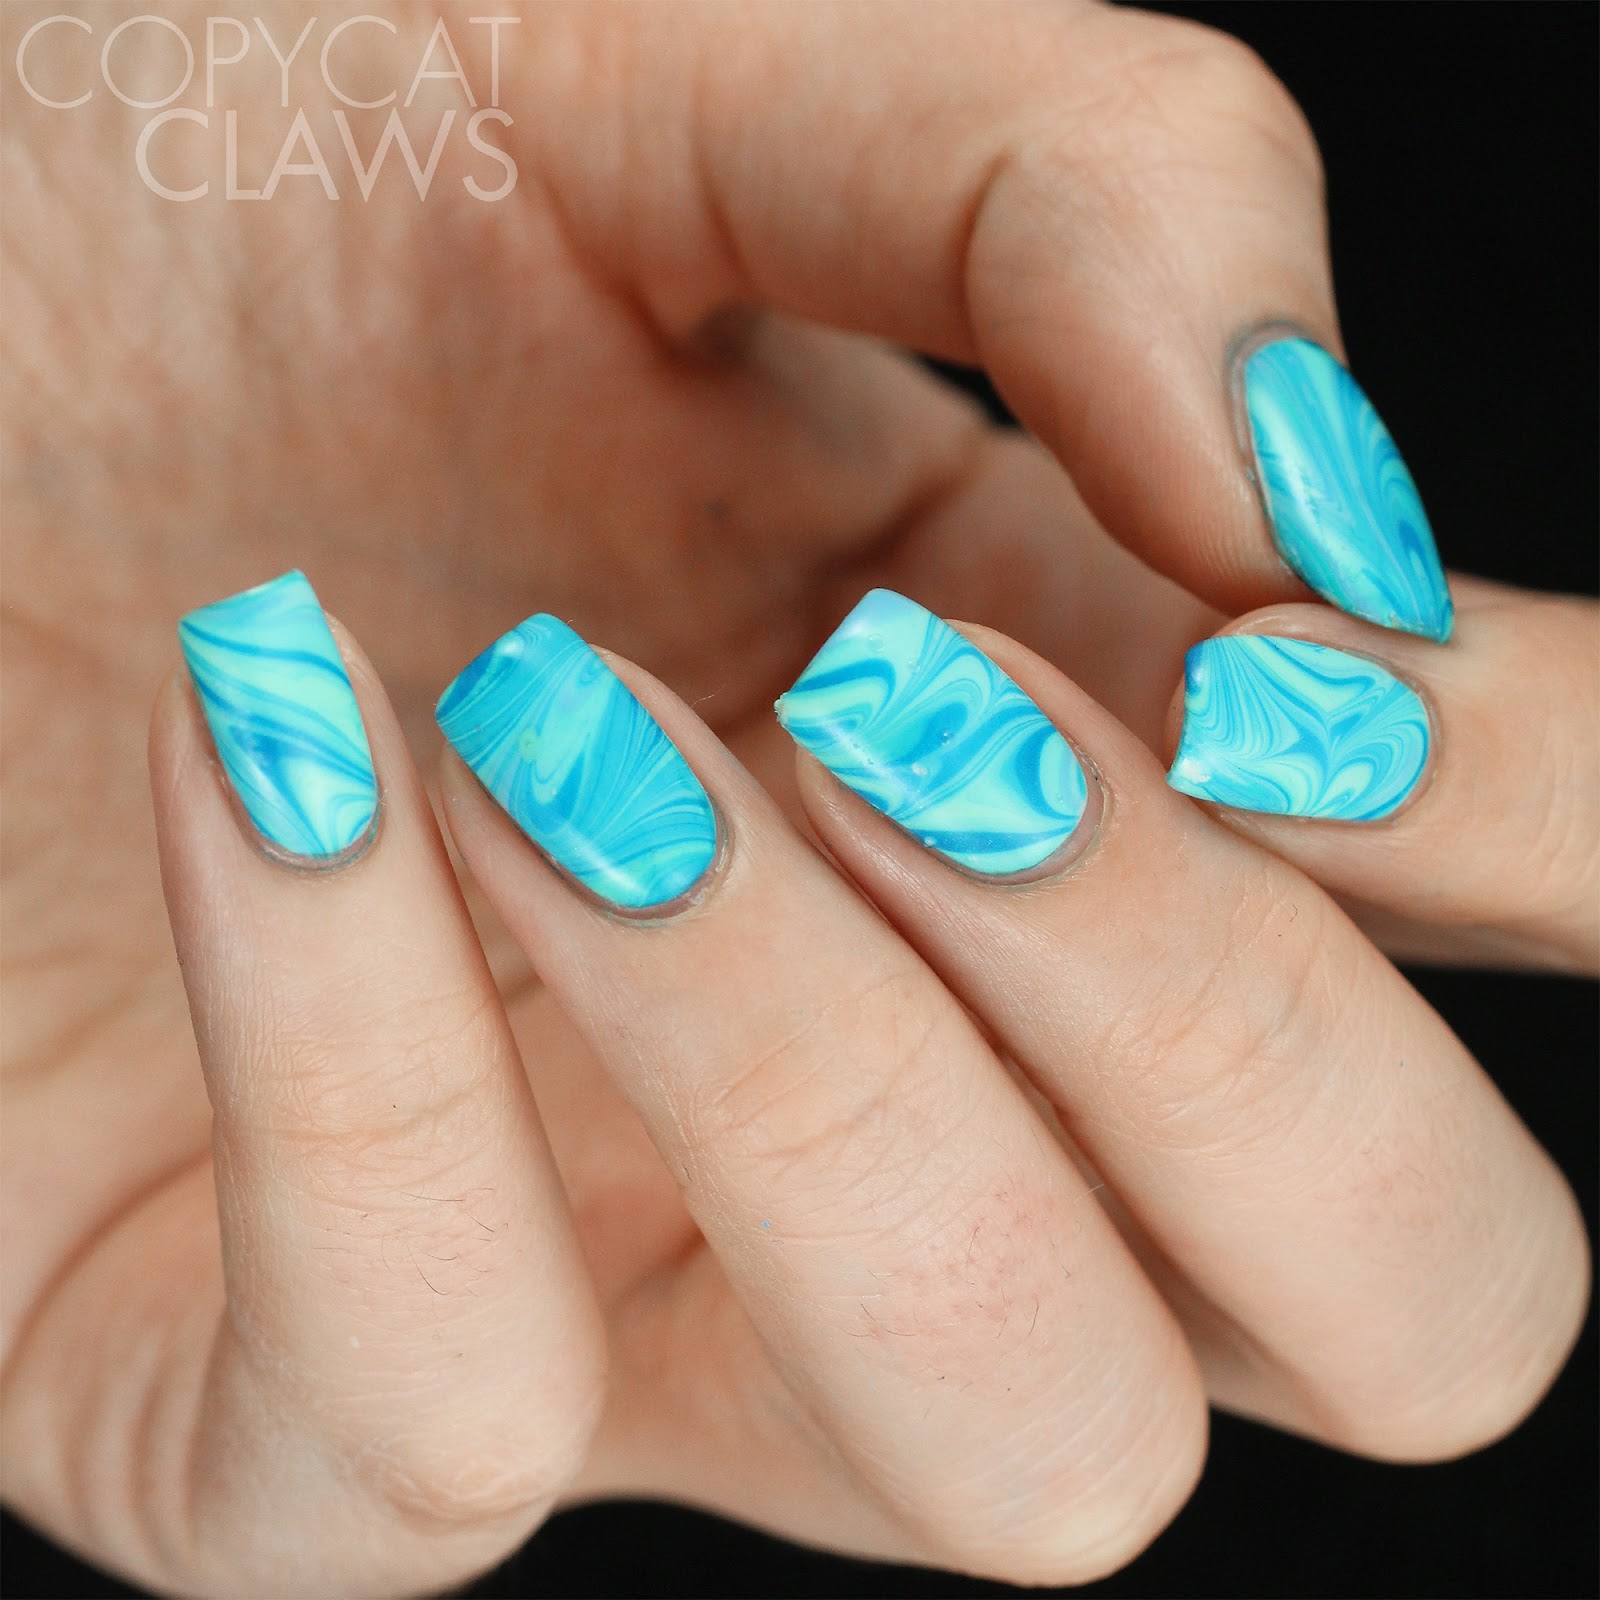 Copycat Claws: 26 Great Nail Art Ideas - Water